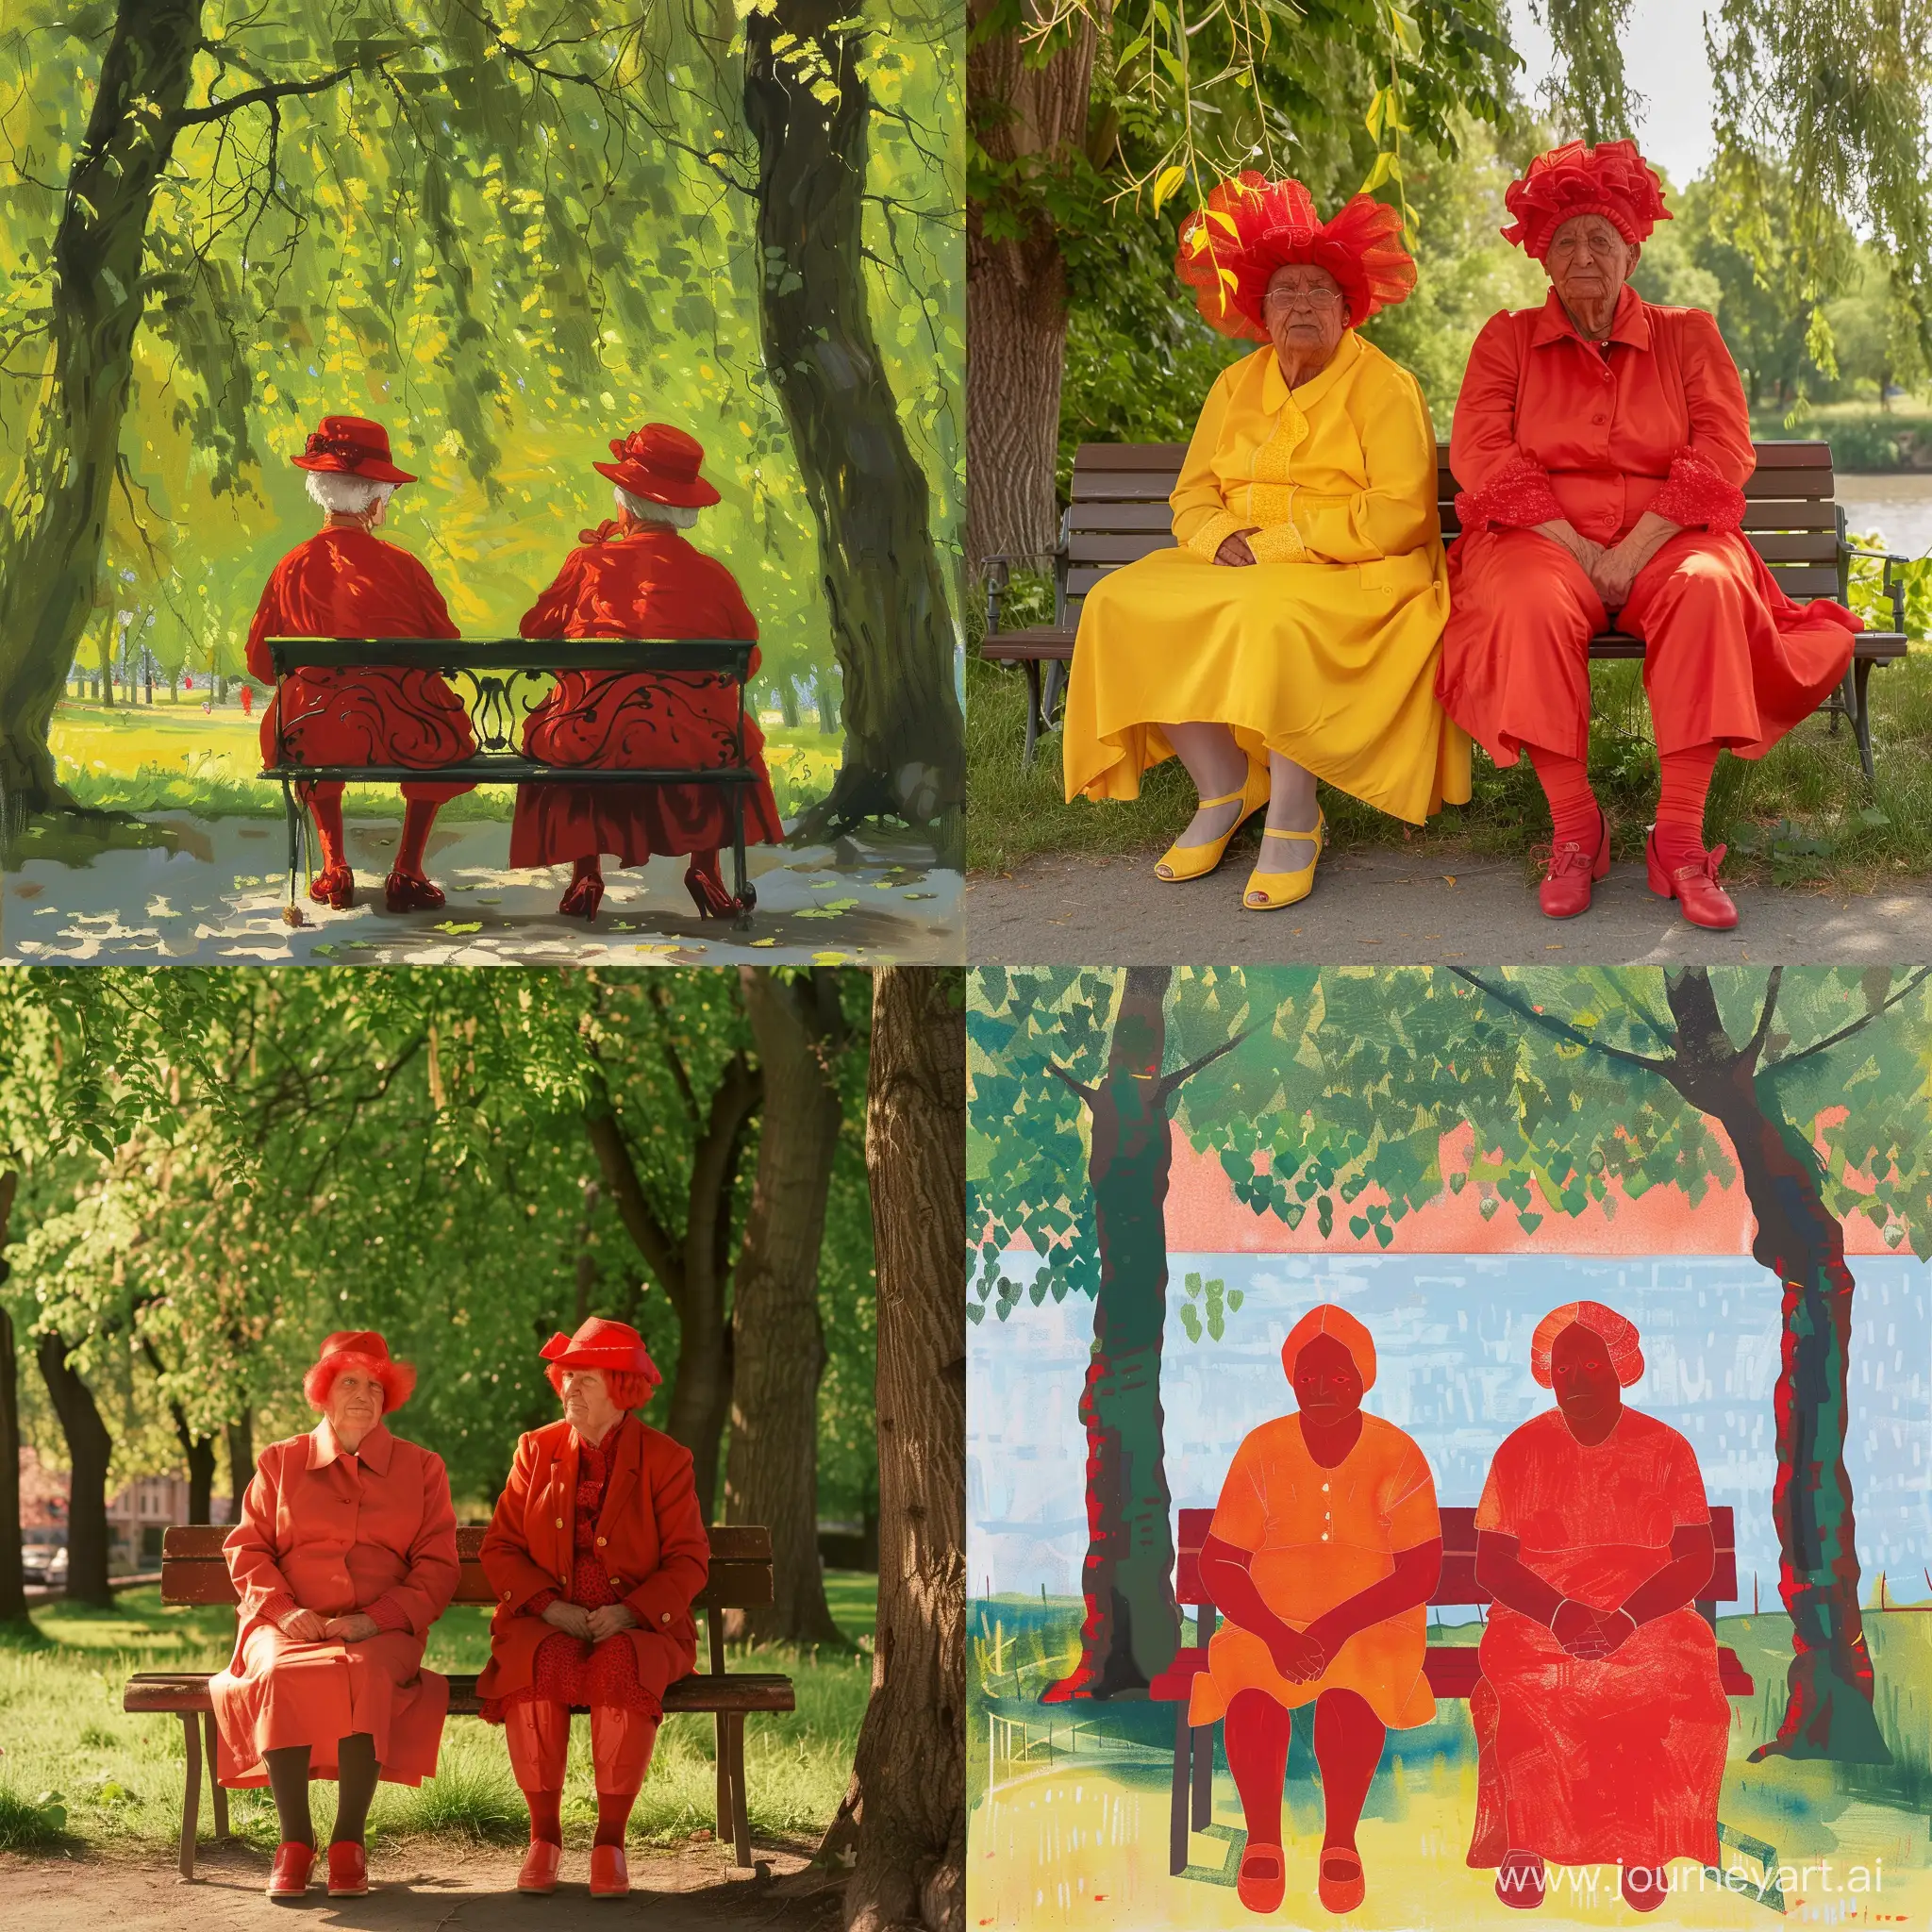 Vibrant-Grandmothers-Relaxing-Under-Linden-Trees-in-Park